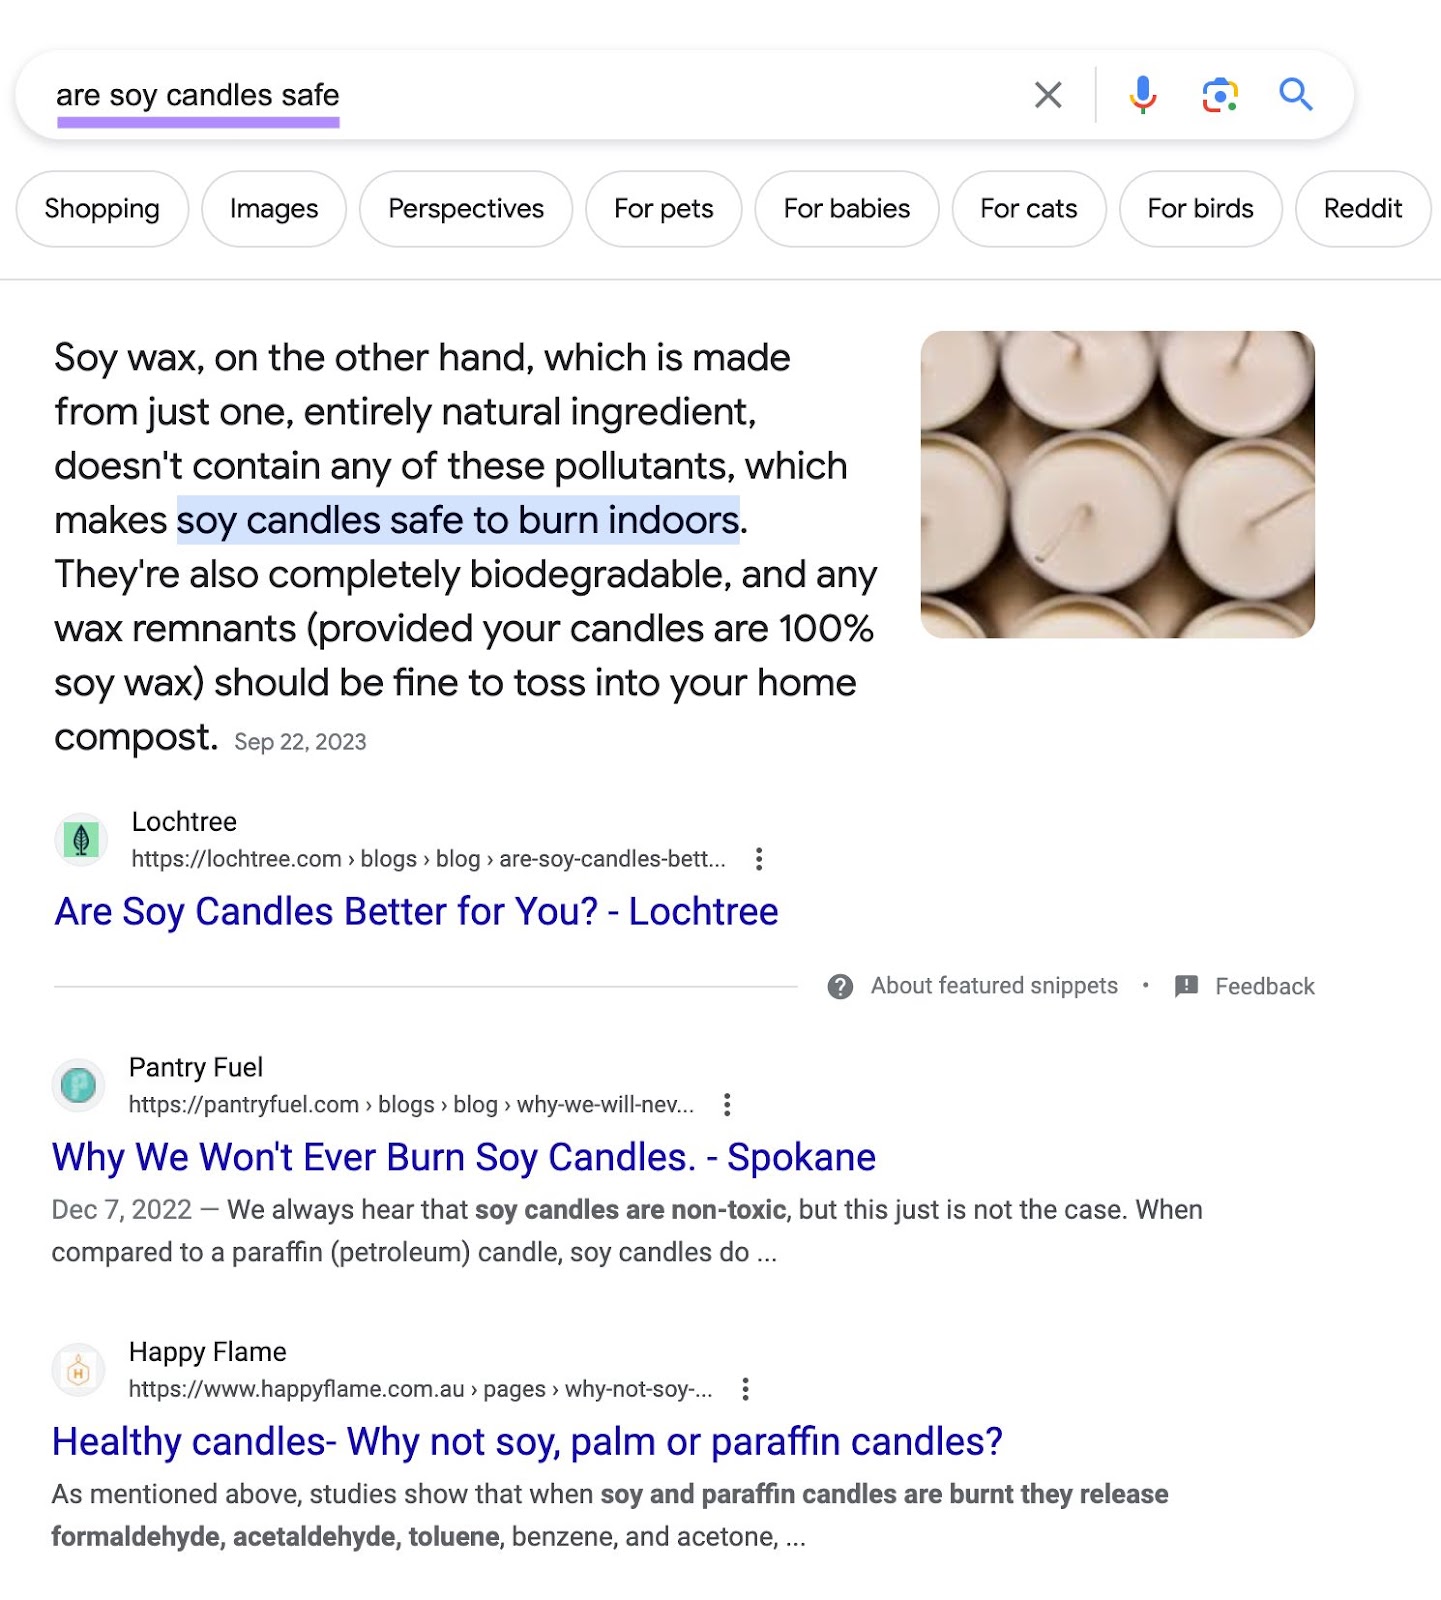 Top of Google's SERP for "are soy candles safe" query